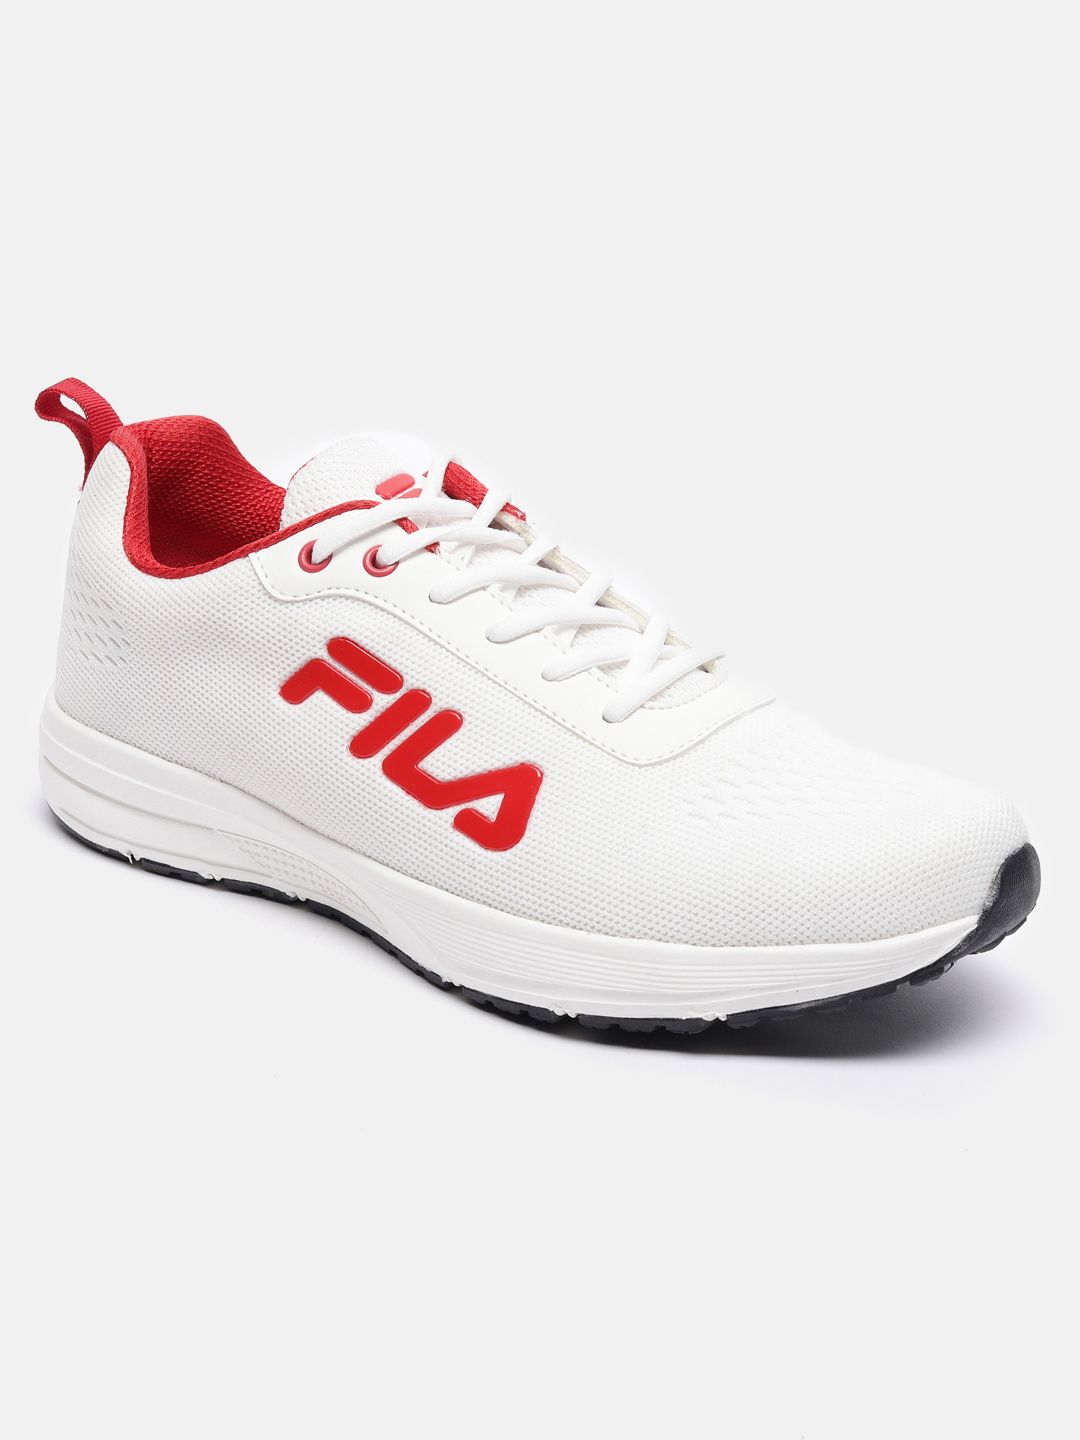 Fila Disruptor Shoes at Rs 2000/pair | फिला कैज़ुअल जूते in Pune | ID:  26504916433